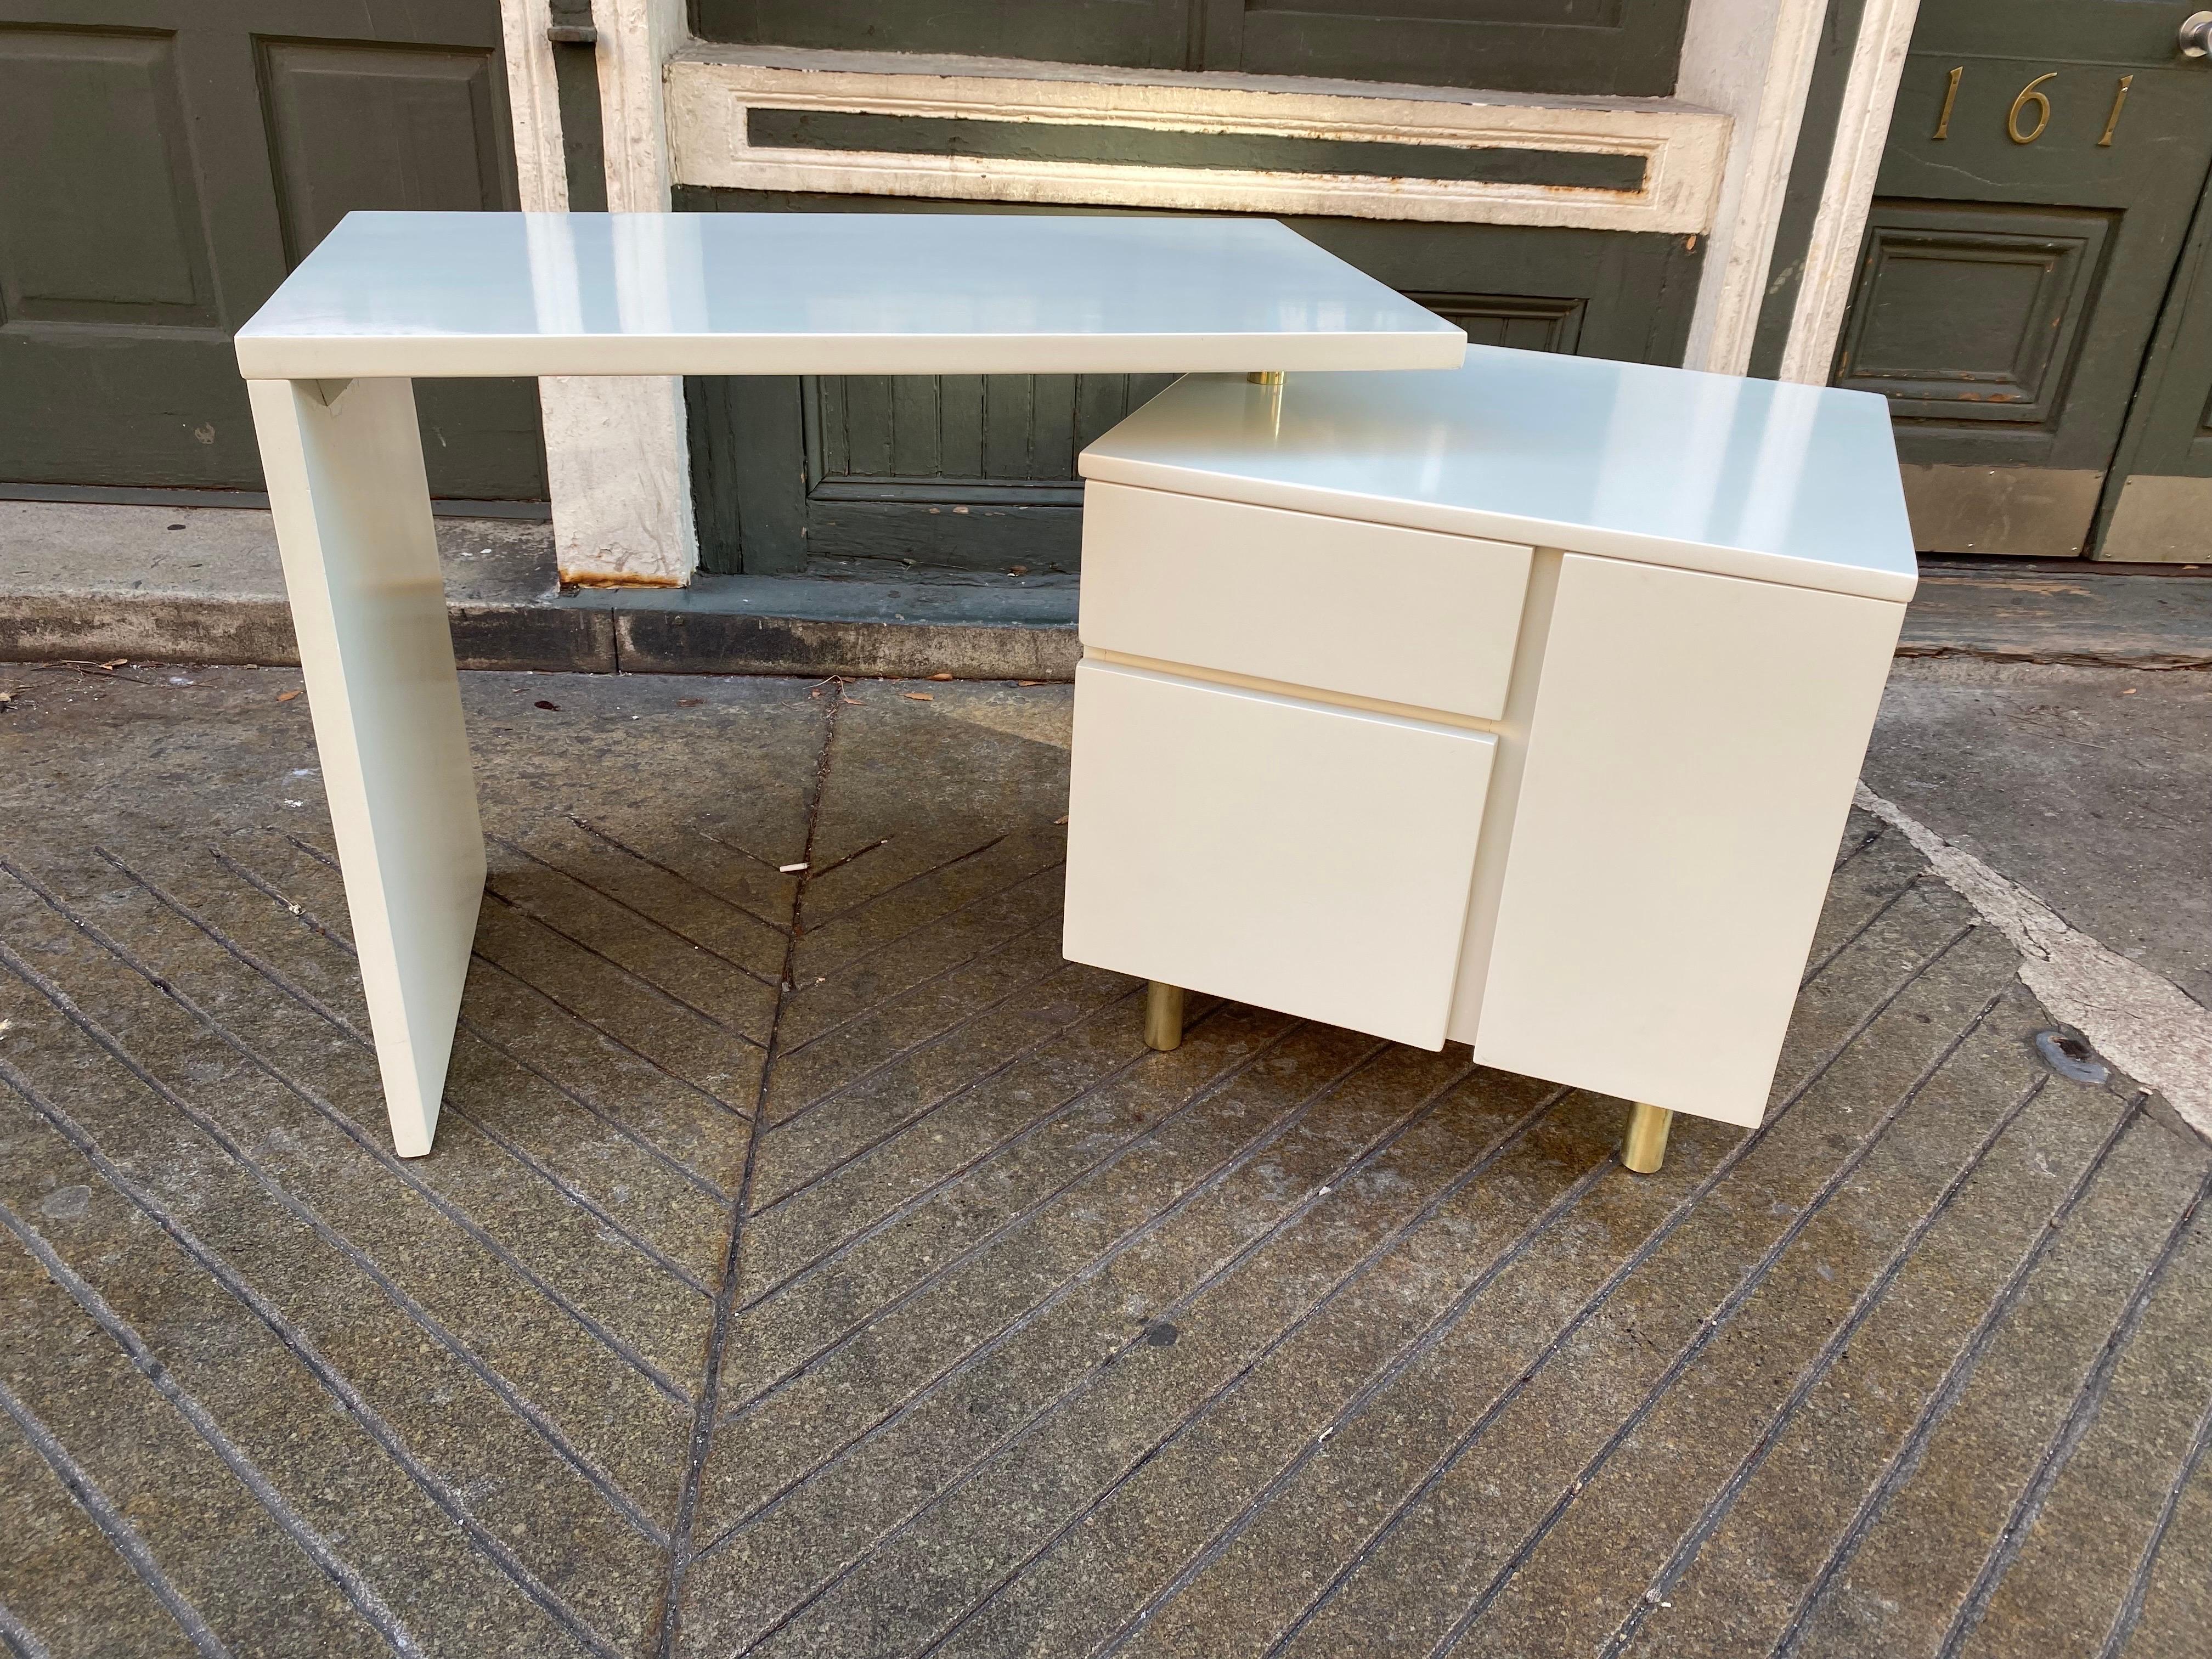 Joe Atkinson for Thonet 2-part swinging/pivoting desk. Clever design that allows you to pivot and angle the work surface away from the storage Cube. Newly redone in a creamy olive color. Brass legs and pivot adds a nice look to this desk. One door